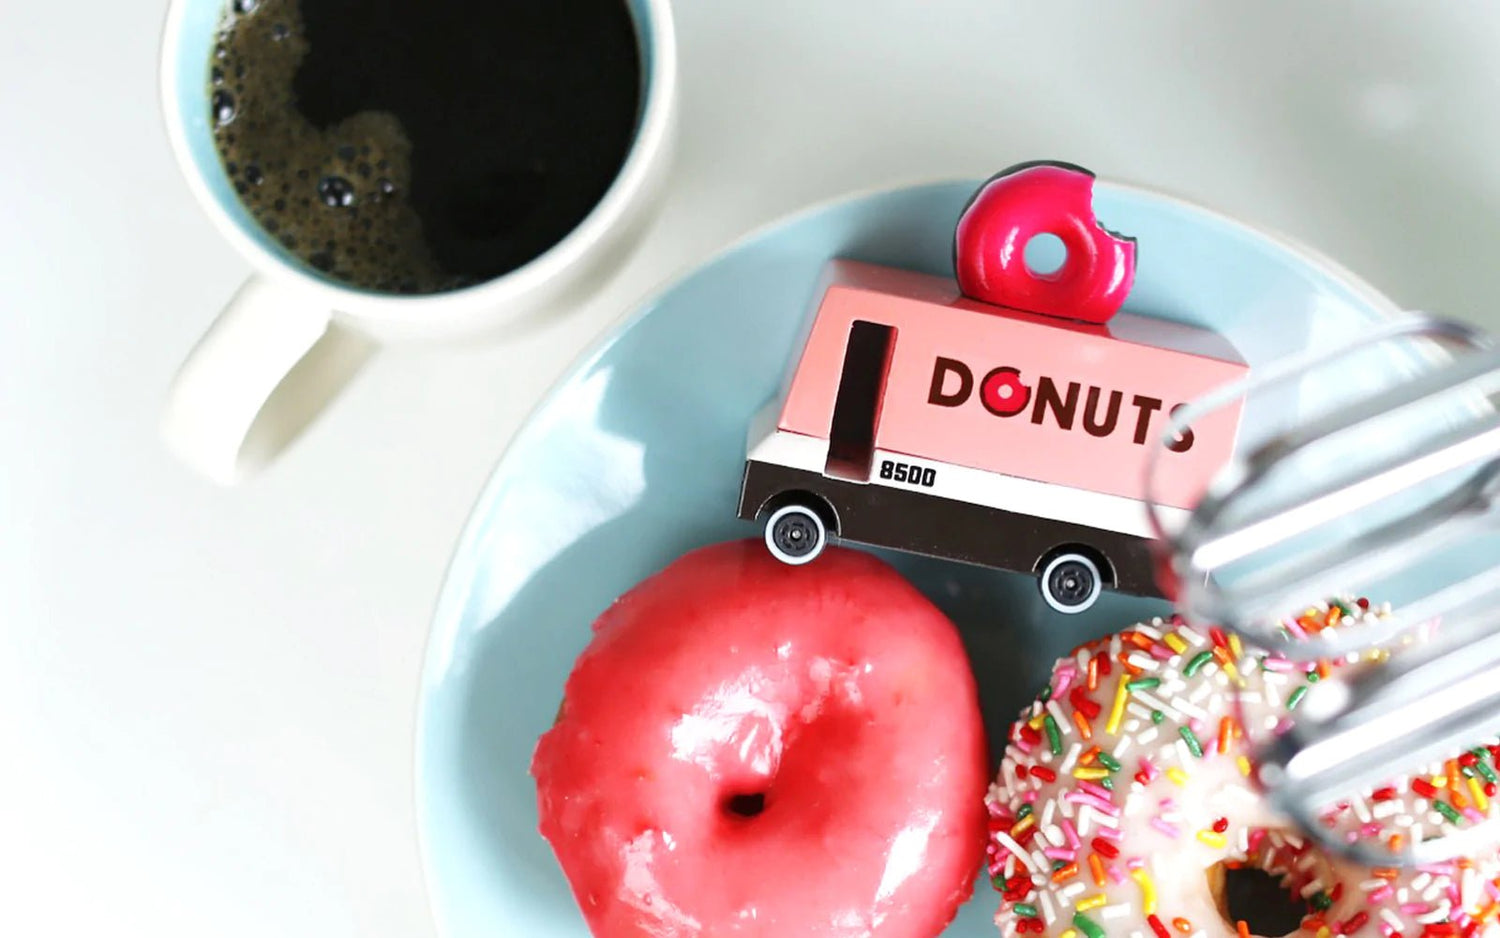 CANDYLAB DONUT VAN by CANDYLAB - The Playful Collective